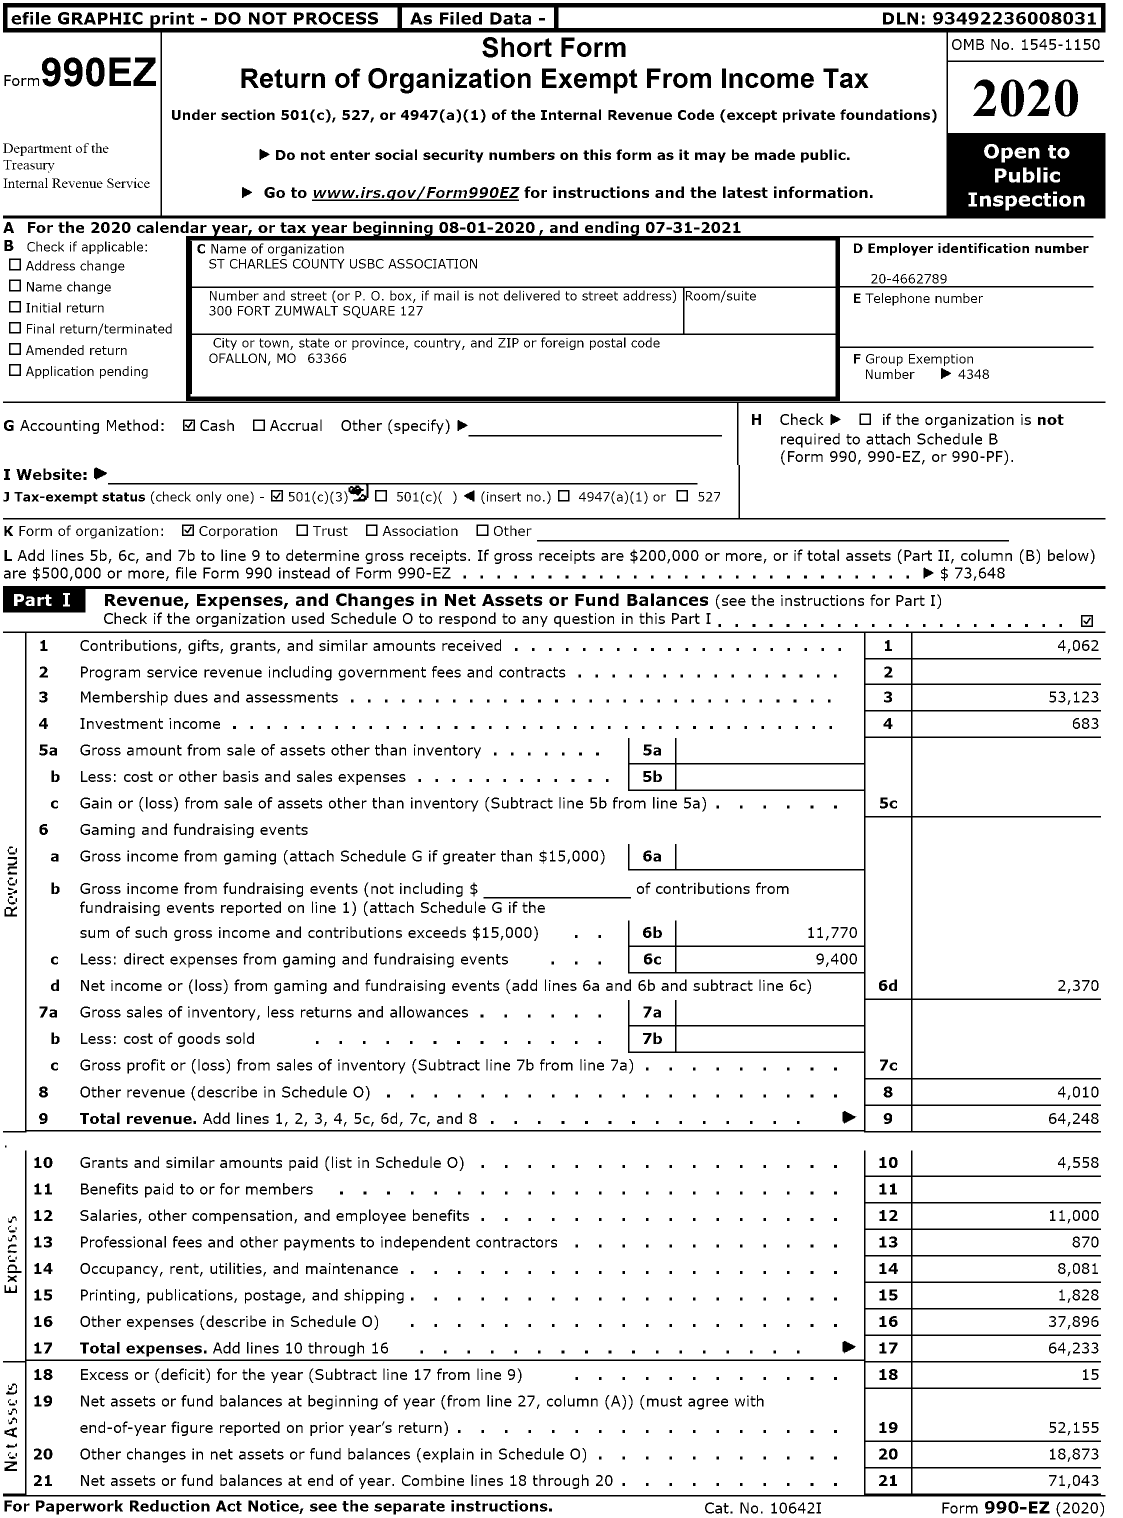 Image of first page of 2020 Form 990EZ for United States Bowling Congress - 81214 St Charles County Usbc